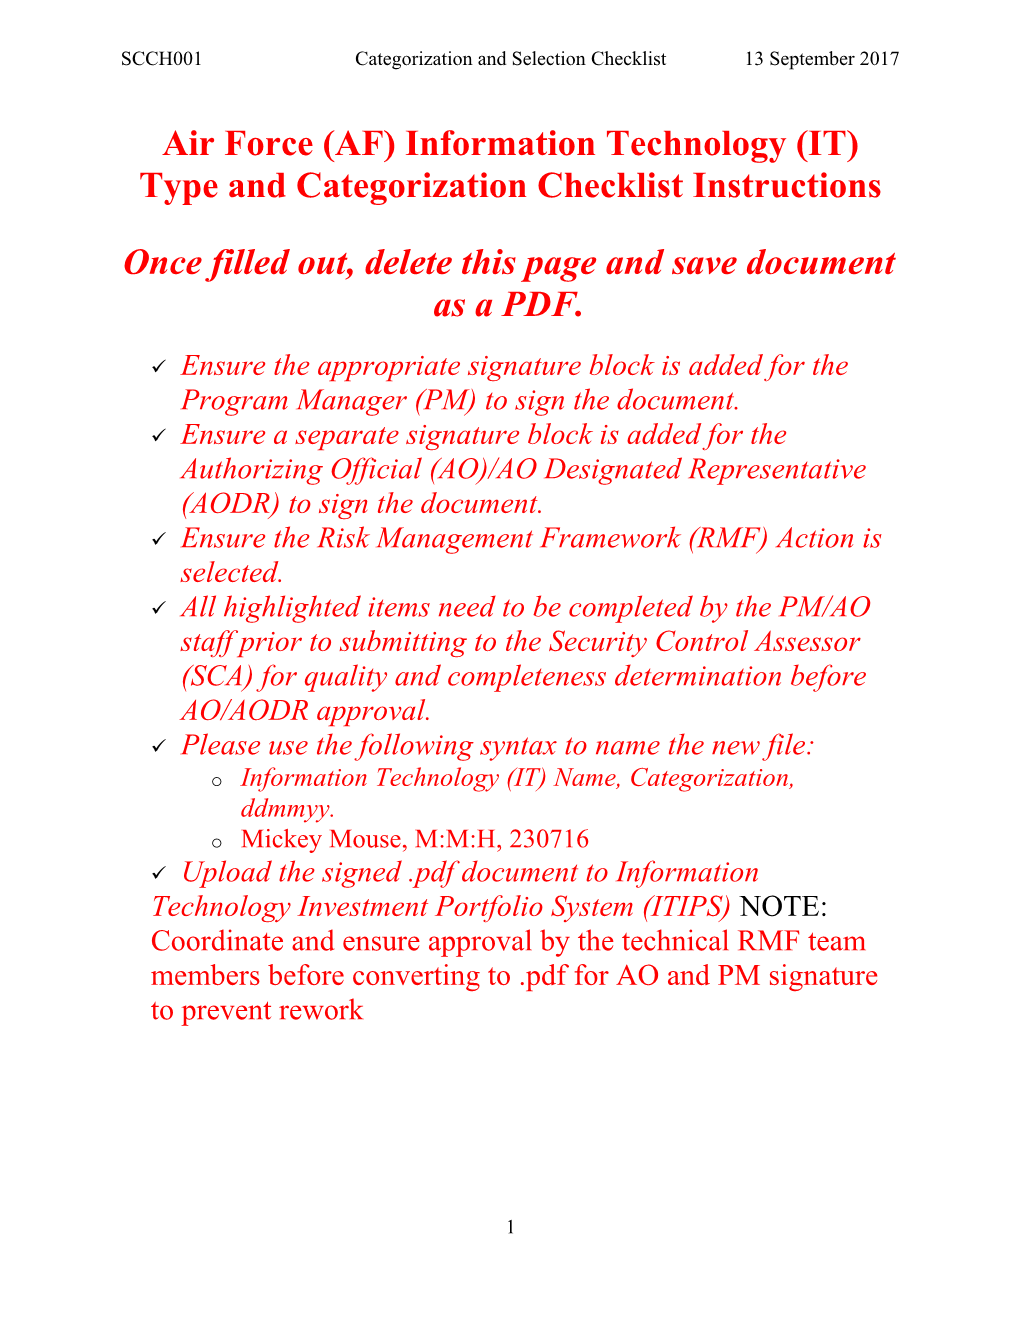 Air Force (AF) Information Technology (IT)Type and Categorization Checklist Instructions